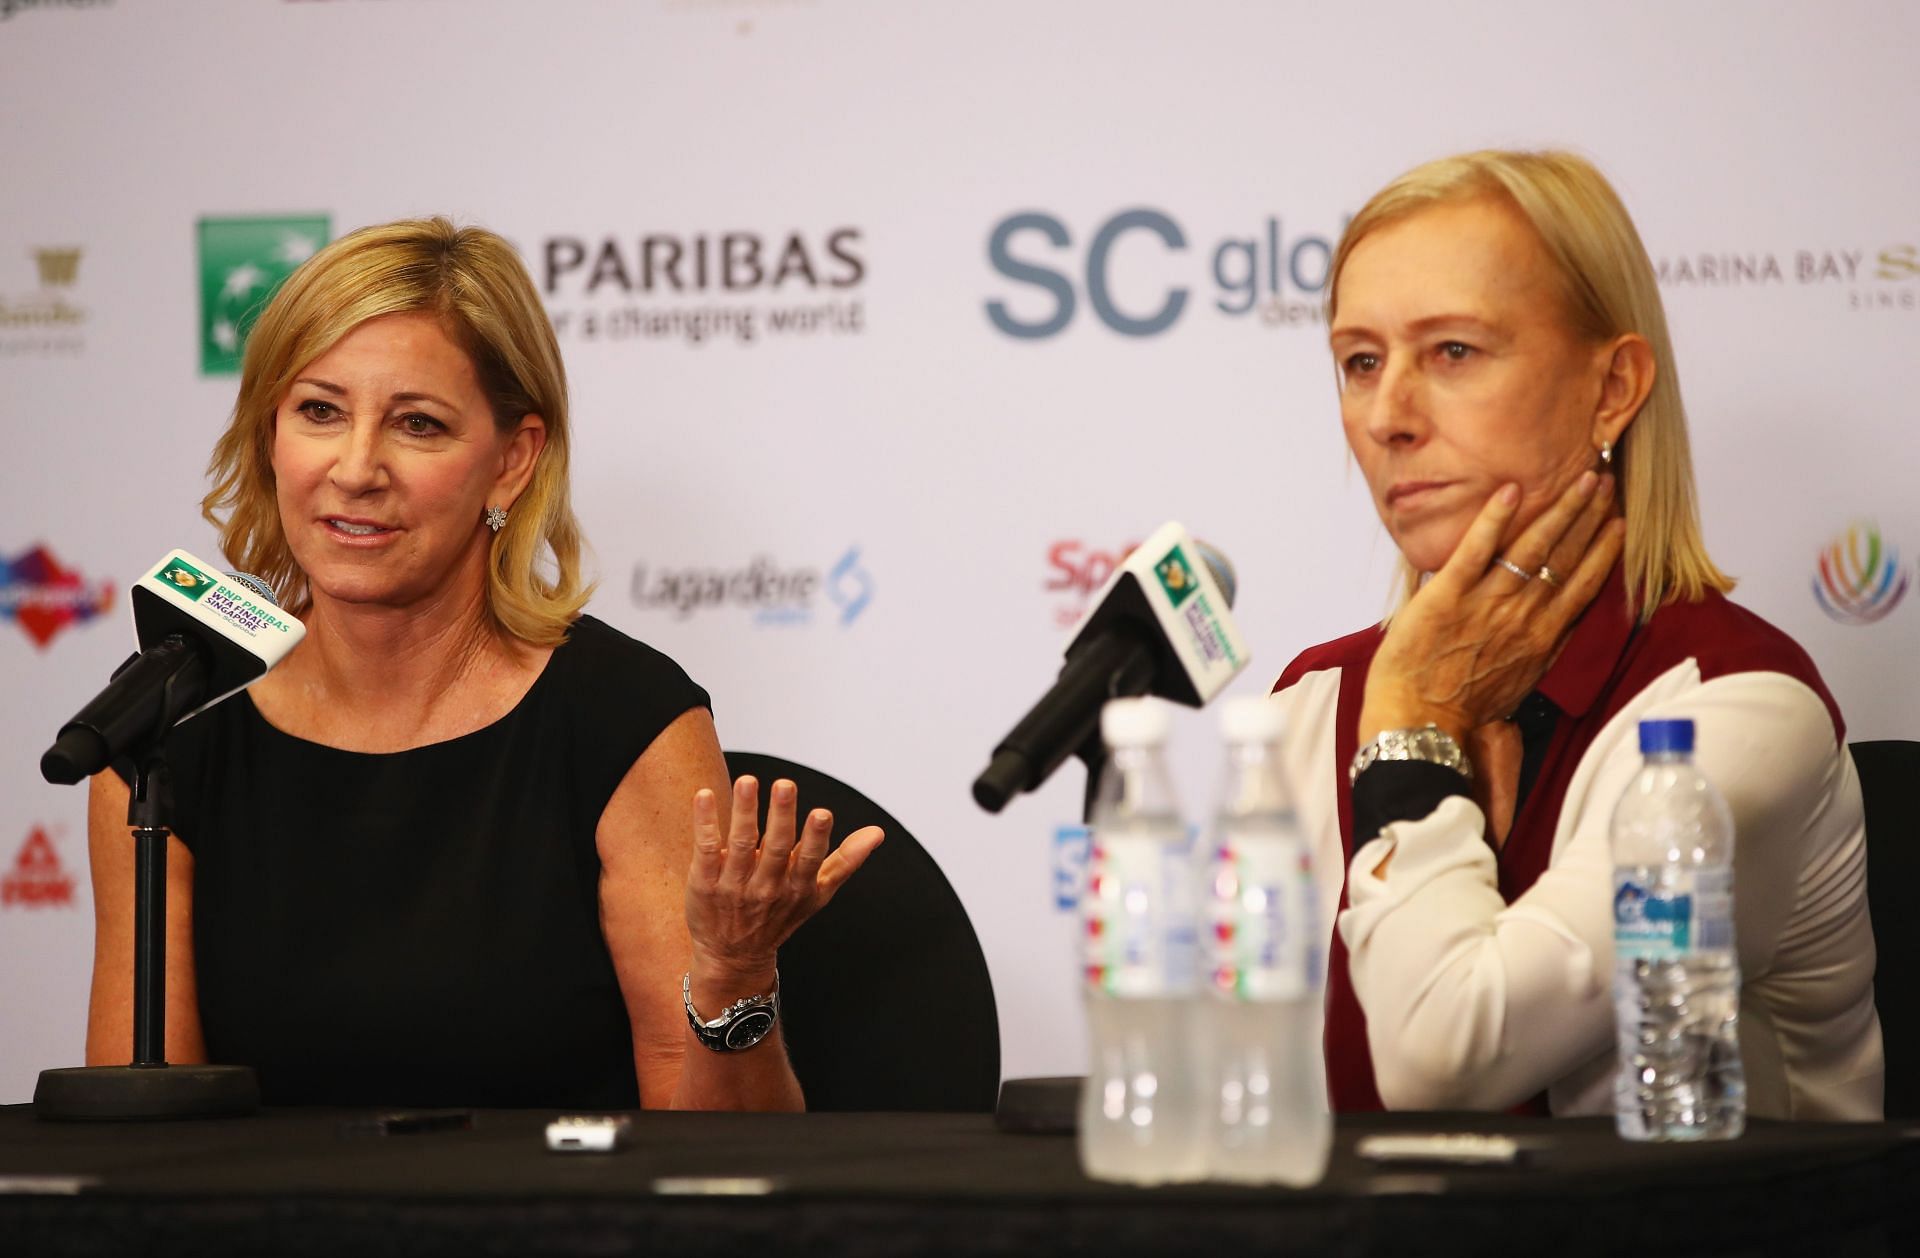 Chris Evert and Martina Navratilova pictured during a press conference.